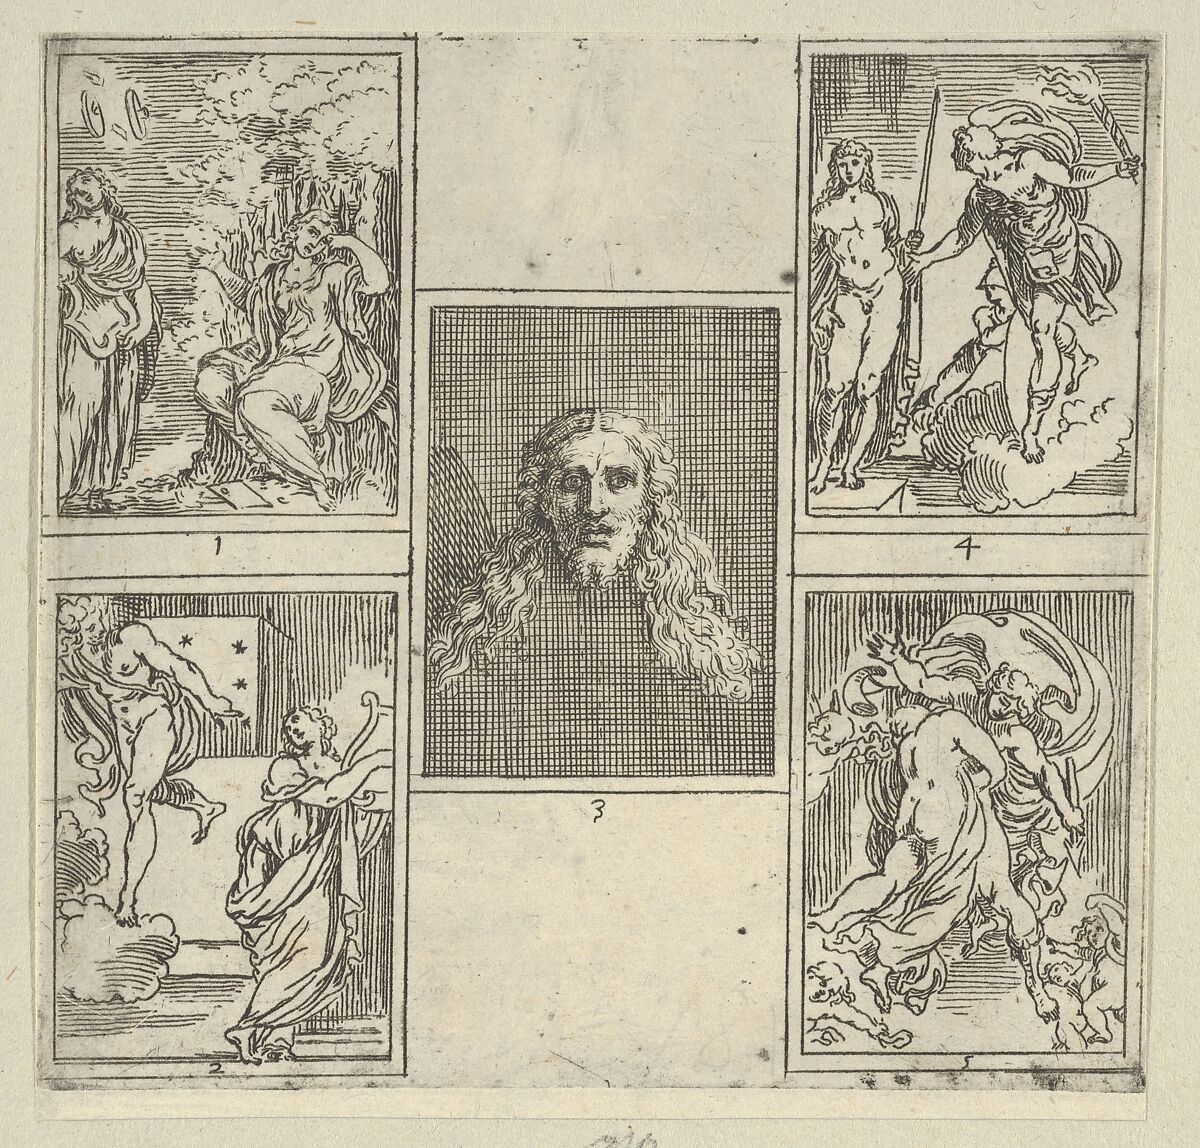 Five numbered scenes, each after a painter in the Accademia Degl'Incamminati, from IL FUNERALE D'AGOSTINO CARRACCIO FATTO IN BOLOGNA SUA PATRIA DAGL'INCAMINATI Academici del Disegno: 1. Painting and Poetry mourning the death of Agostino Carracci, painted by Francesco Brizio; 2. Painting with a lyre and Apollo pointing to stars on Carracci's grave, design by Giacomo Cavedone; 3. The head of Christ, painted by Agostino Carracci; 4. Prometheus with a torch and Athena behind him, painted by Alessandro Albini; 5. Aurora abducting Cephalus, painted by Leonello Spada., Guido Reni (Italian, Bologna 1575–1642 Bologna), Etching 